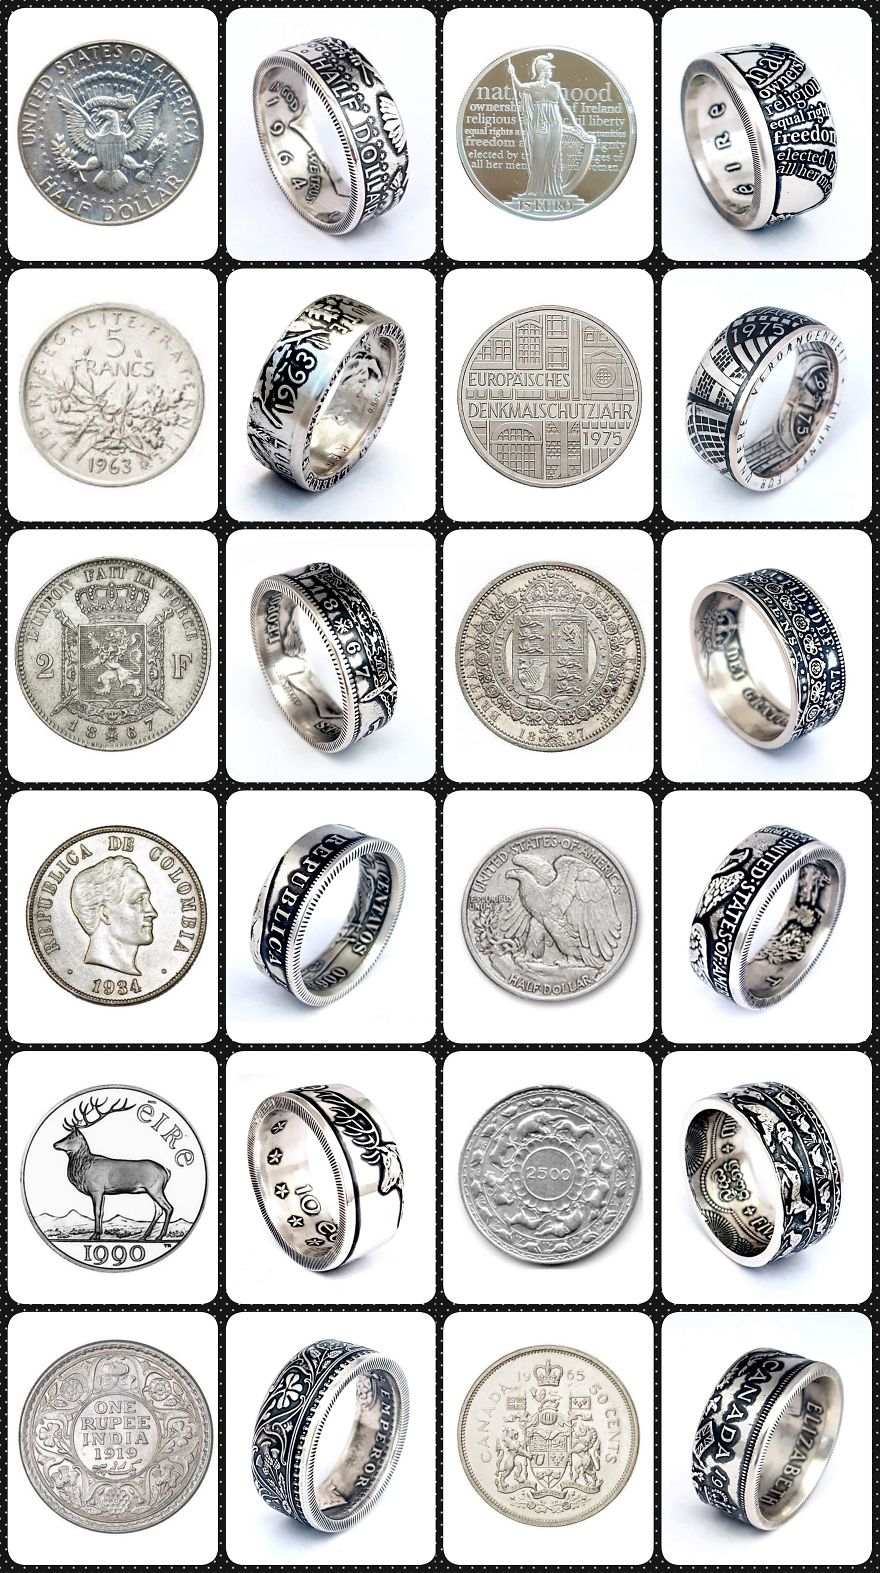 I Make Rings From Coins. Here's How I Do It.